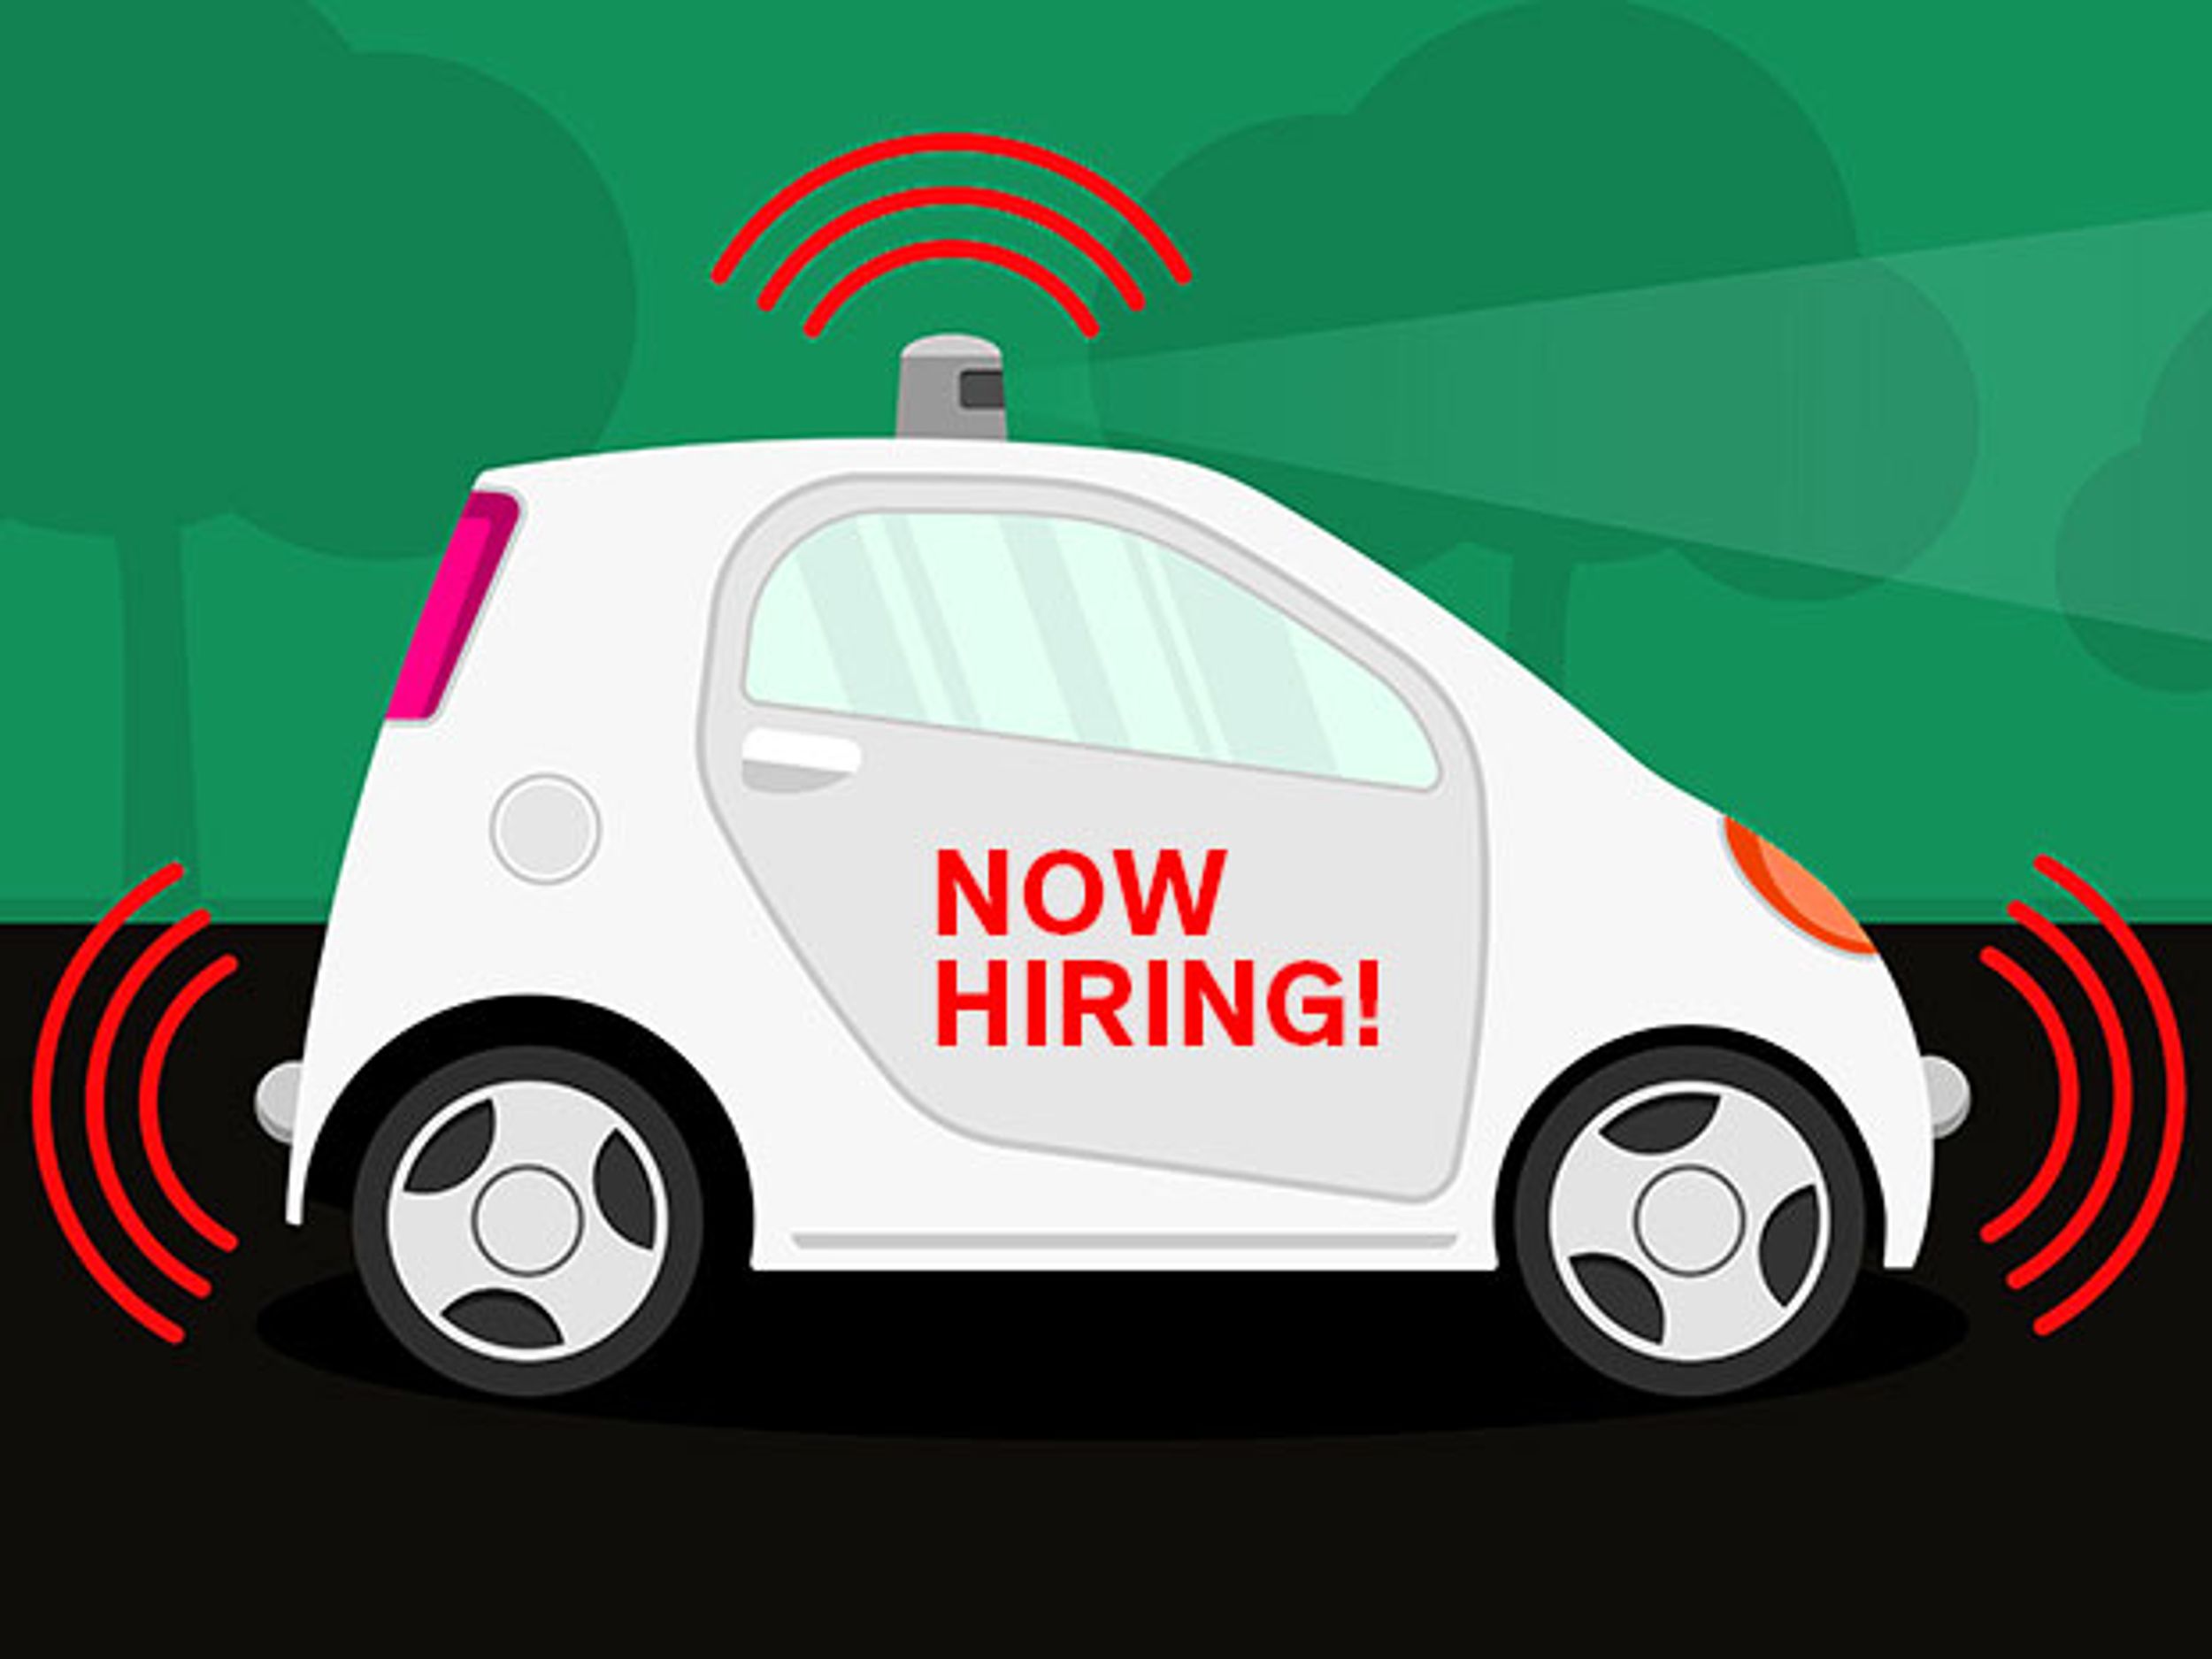 A cartoon of a self-driving car with a &quot;Now Hiring&quot; sign shows the autonomous vehicle industry is looking for software engineers